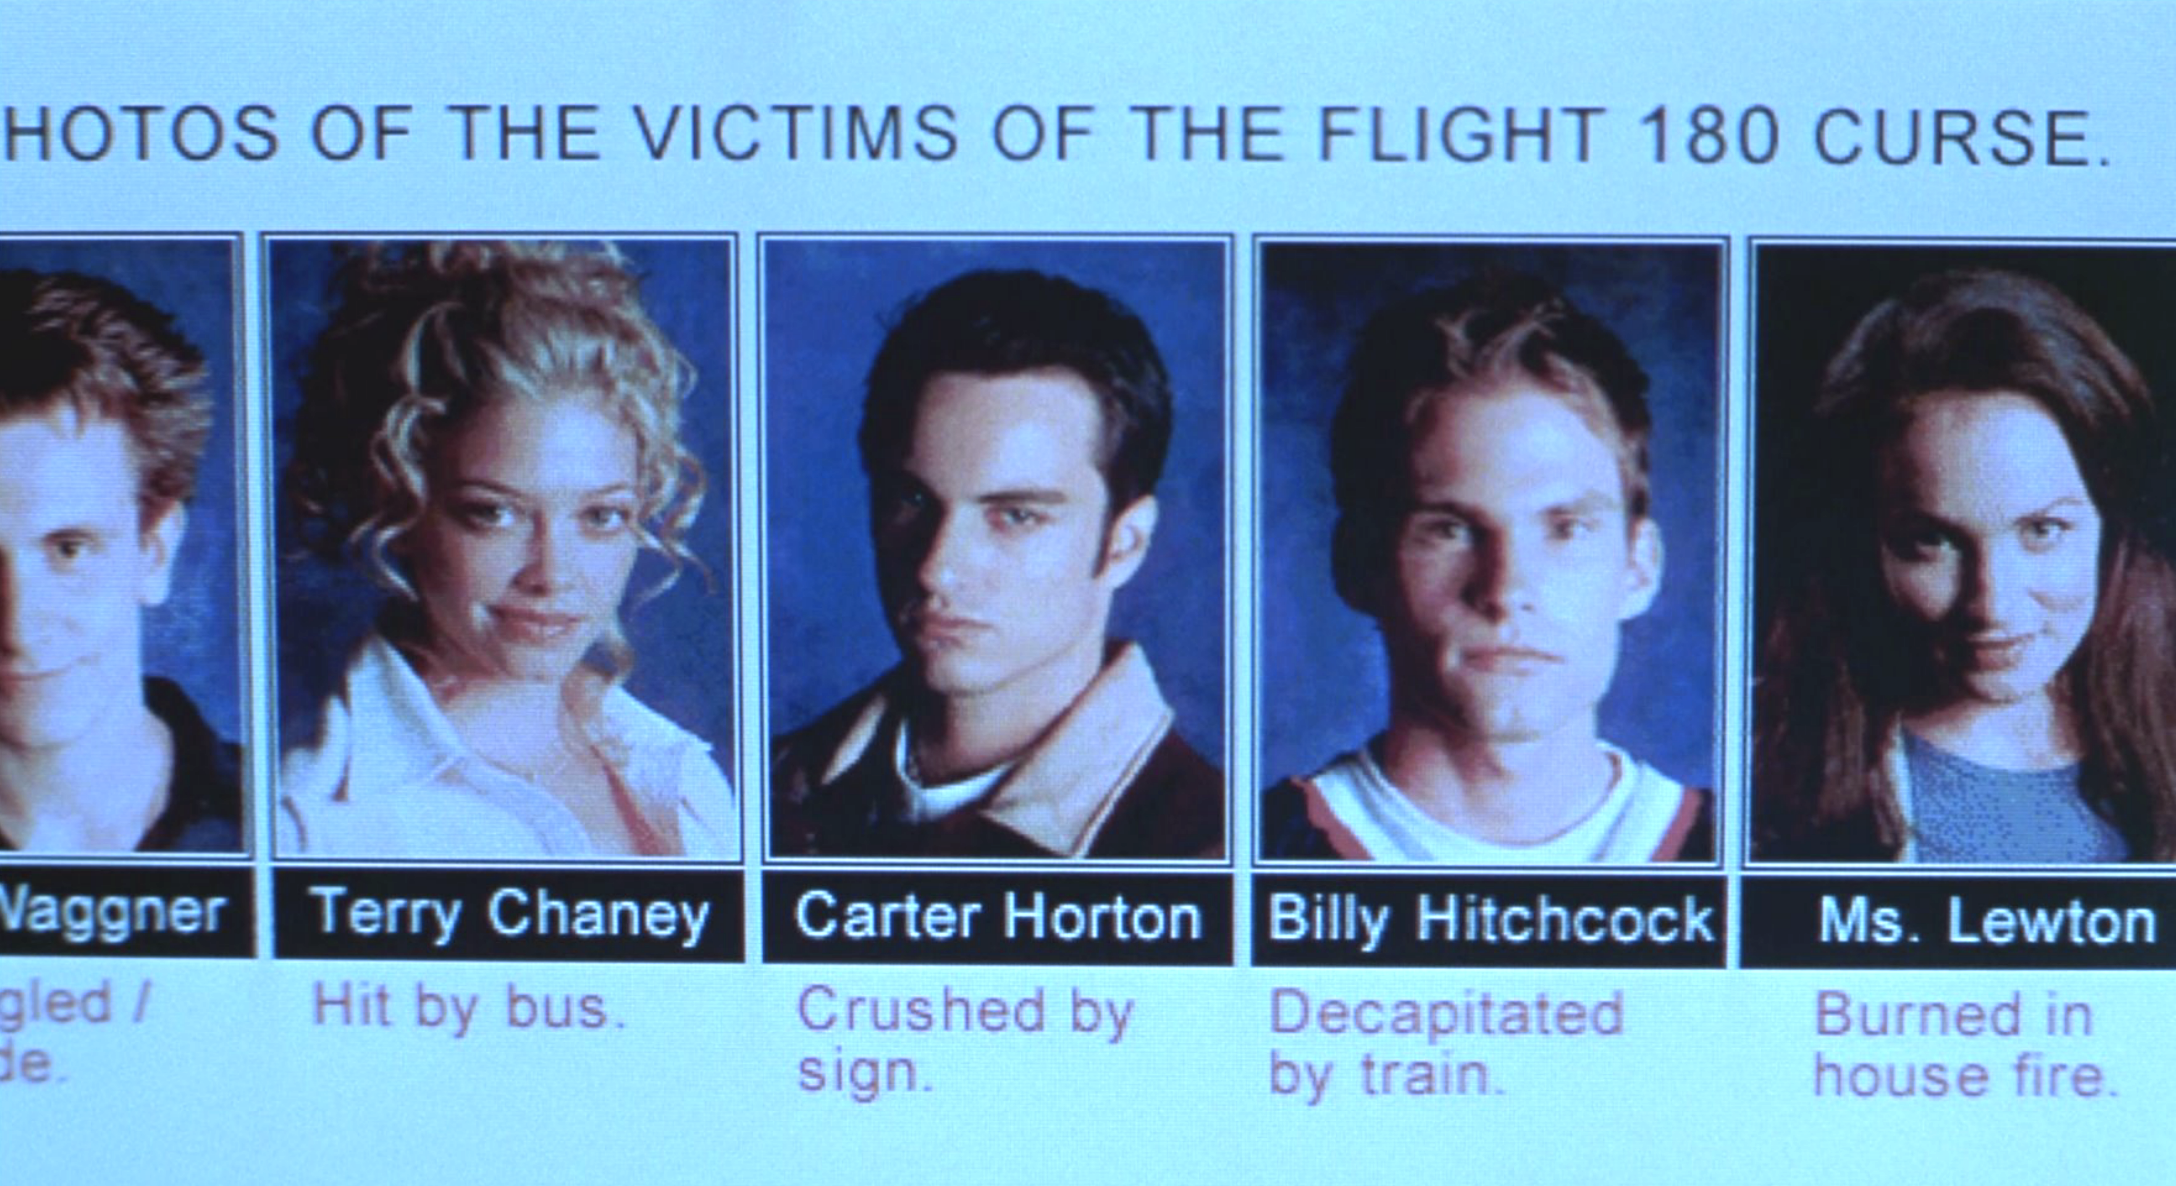 Yearbook photos of students who crashed in the plane in &quot;Final Destination&quot;